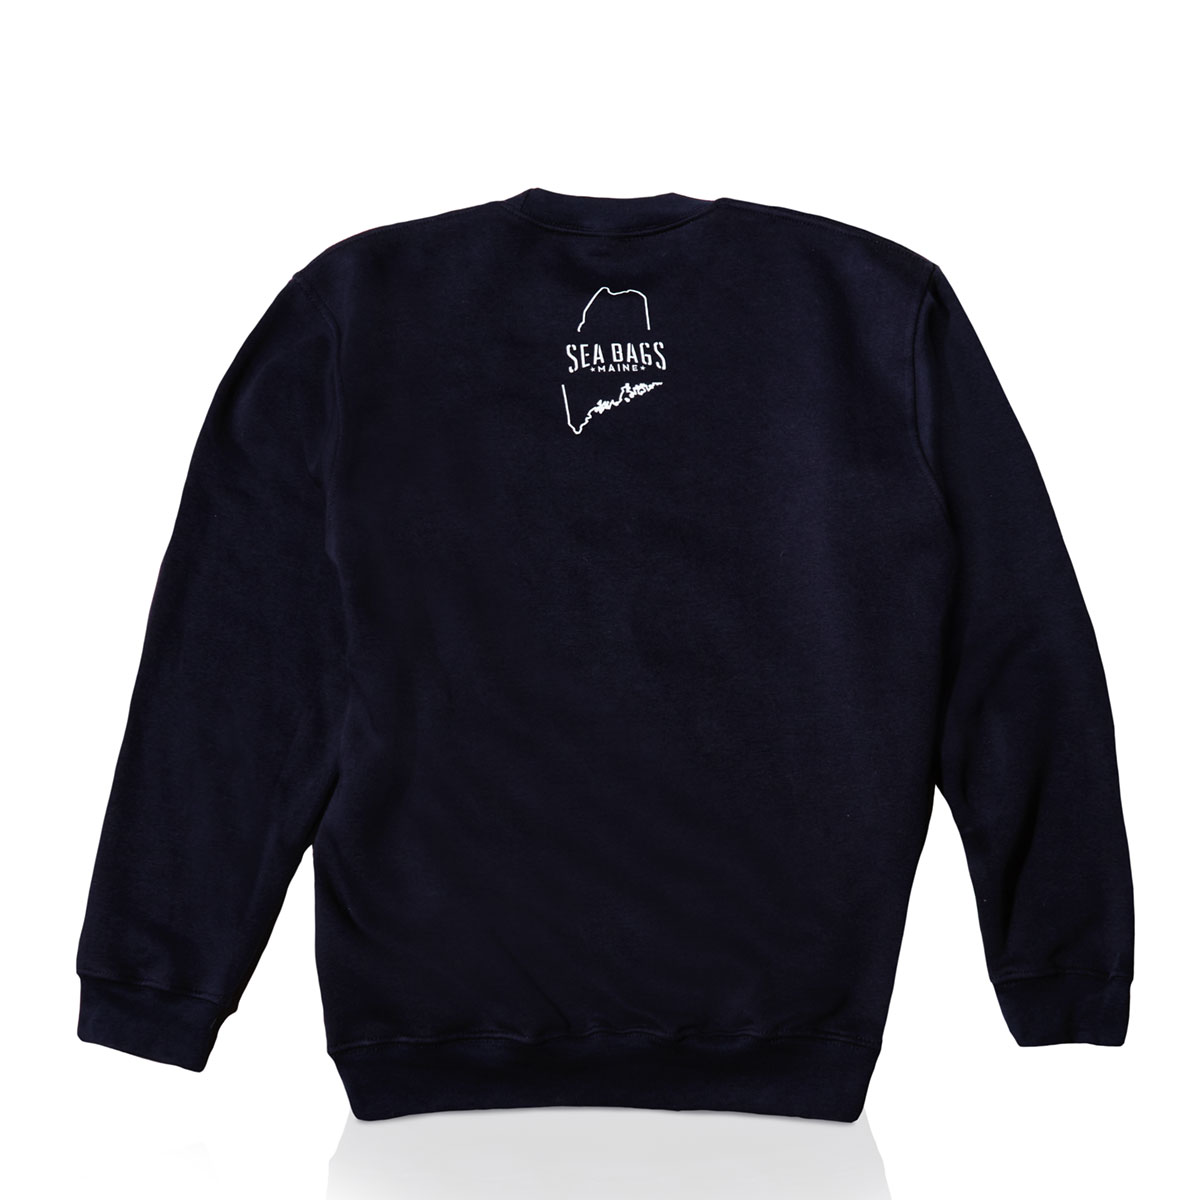 back view of sweatshirt with sea bags logo in white on upper back